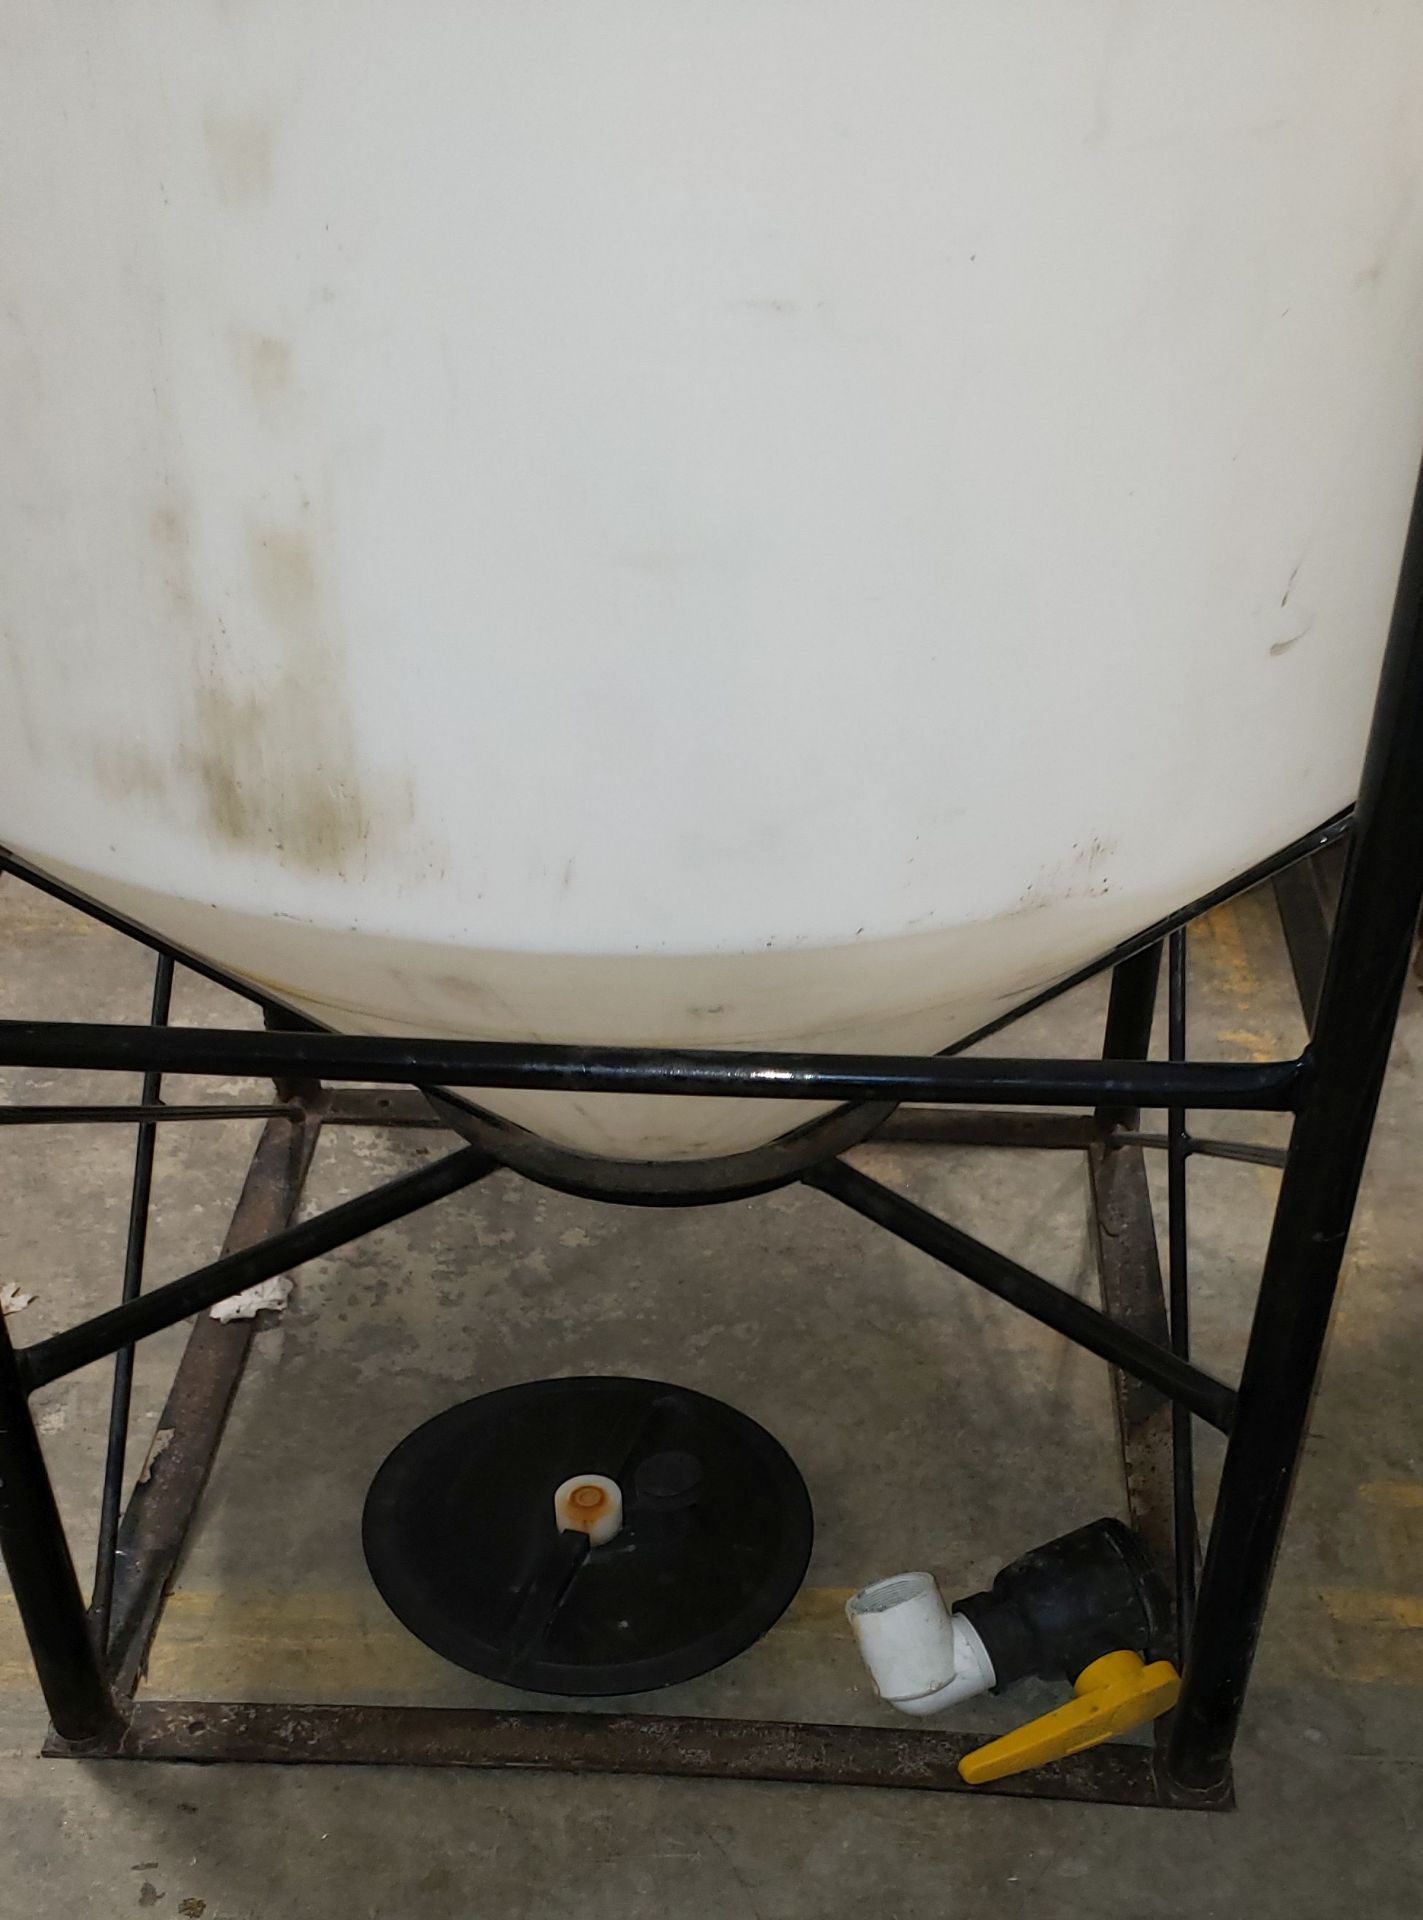 350 gallon pvc holding tanks with valve, lid and stand - Image 2 of 3